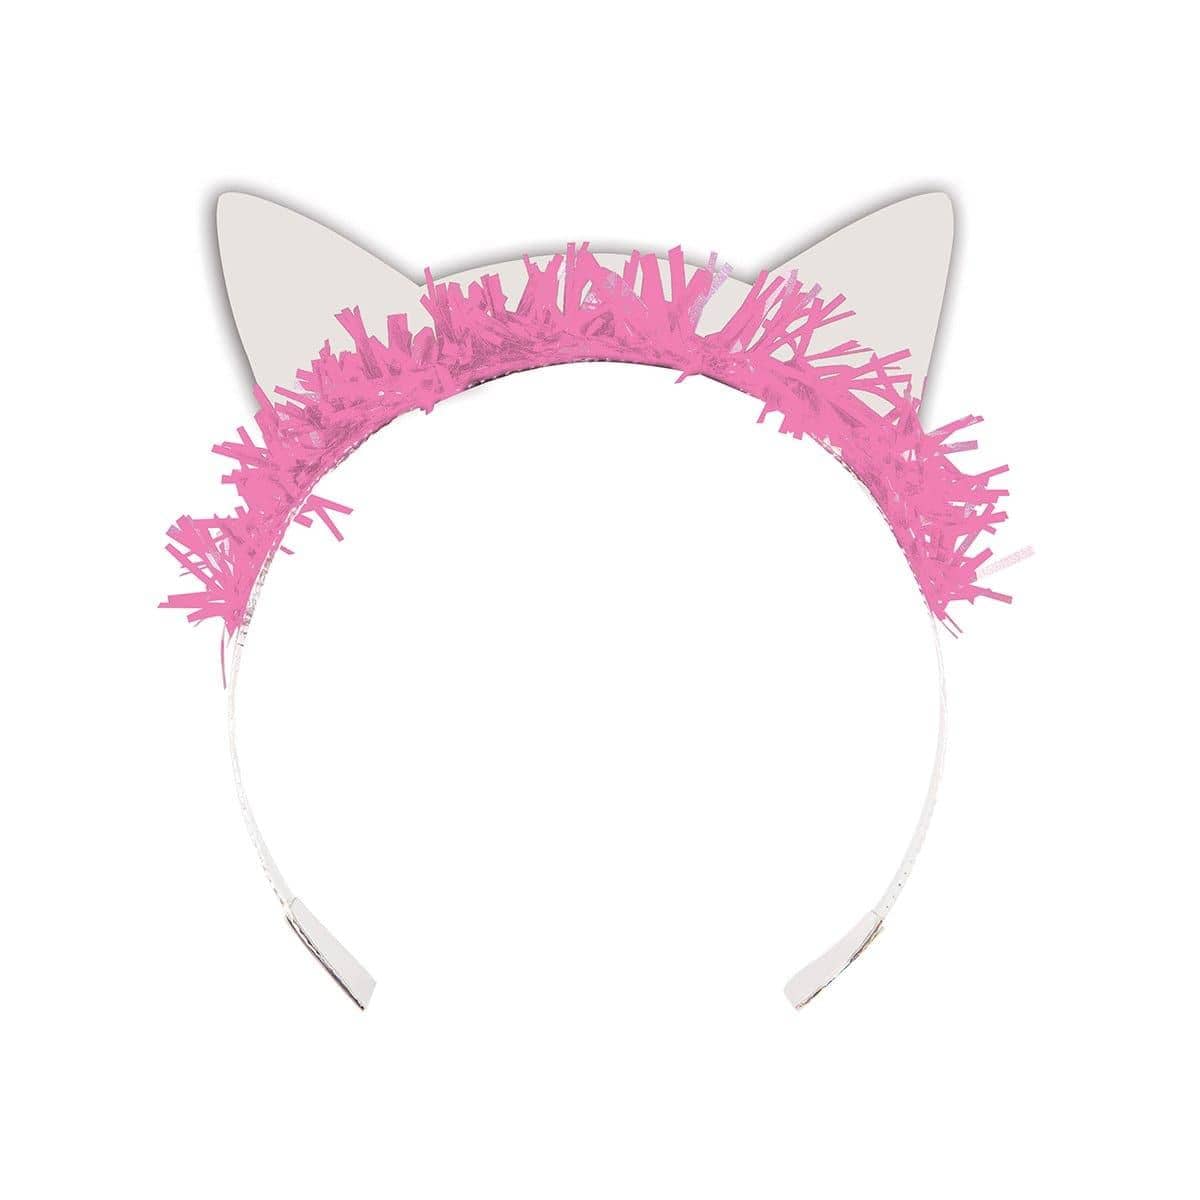 Buy Kids Birthday Purr-fect Party tiaras, 8 per package sold at Party Expert